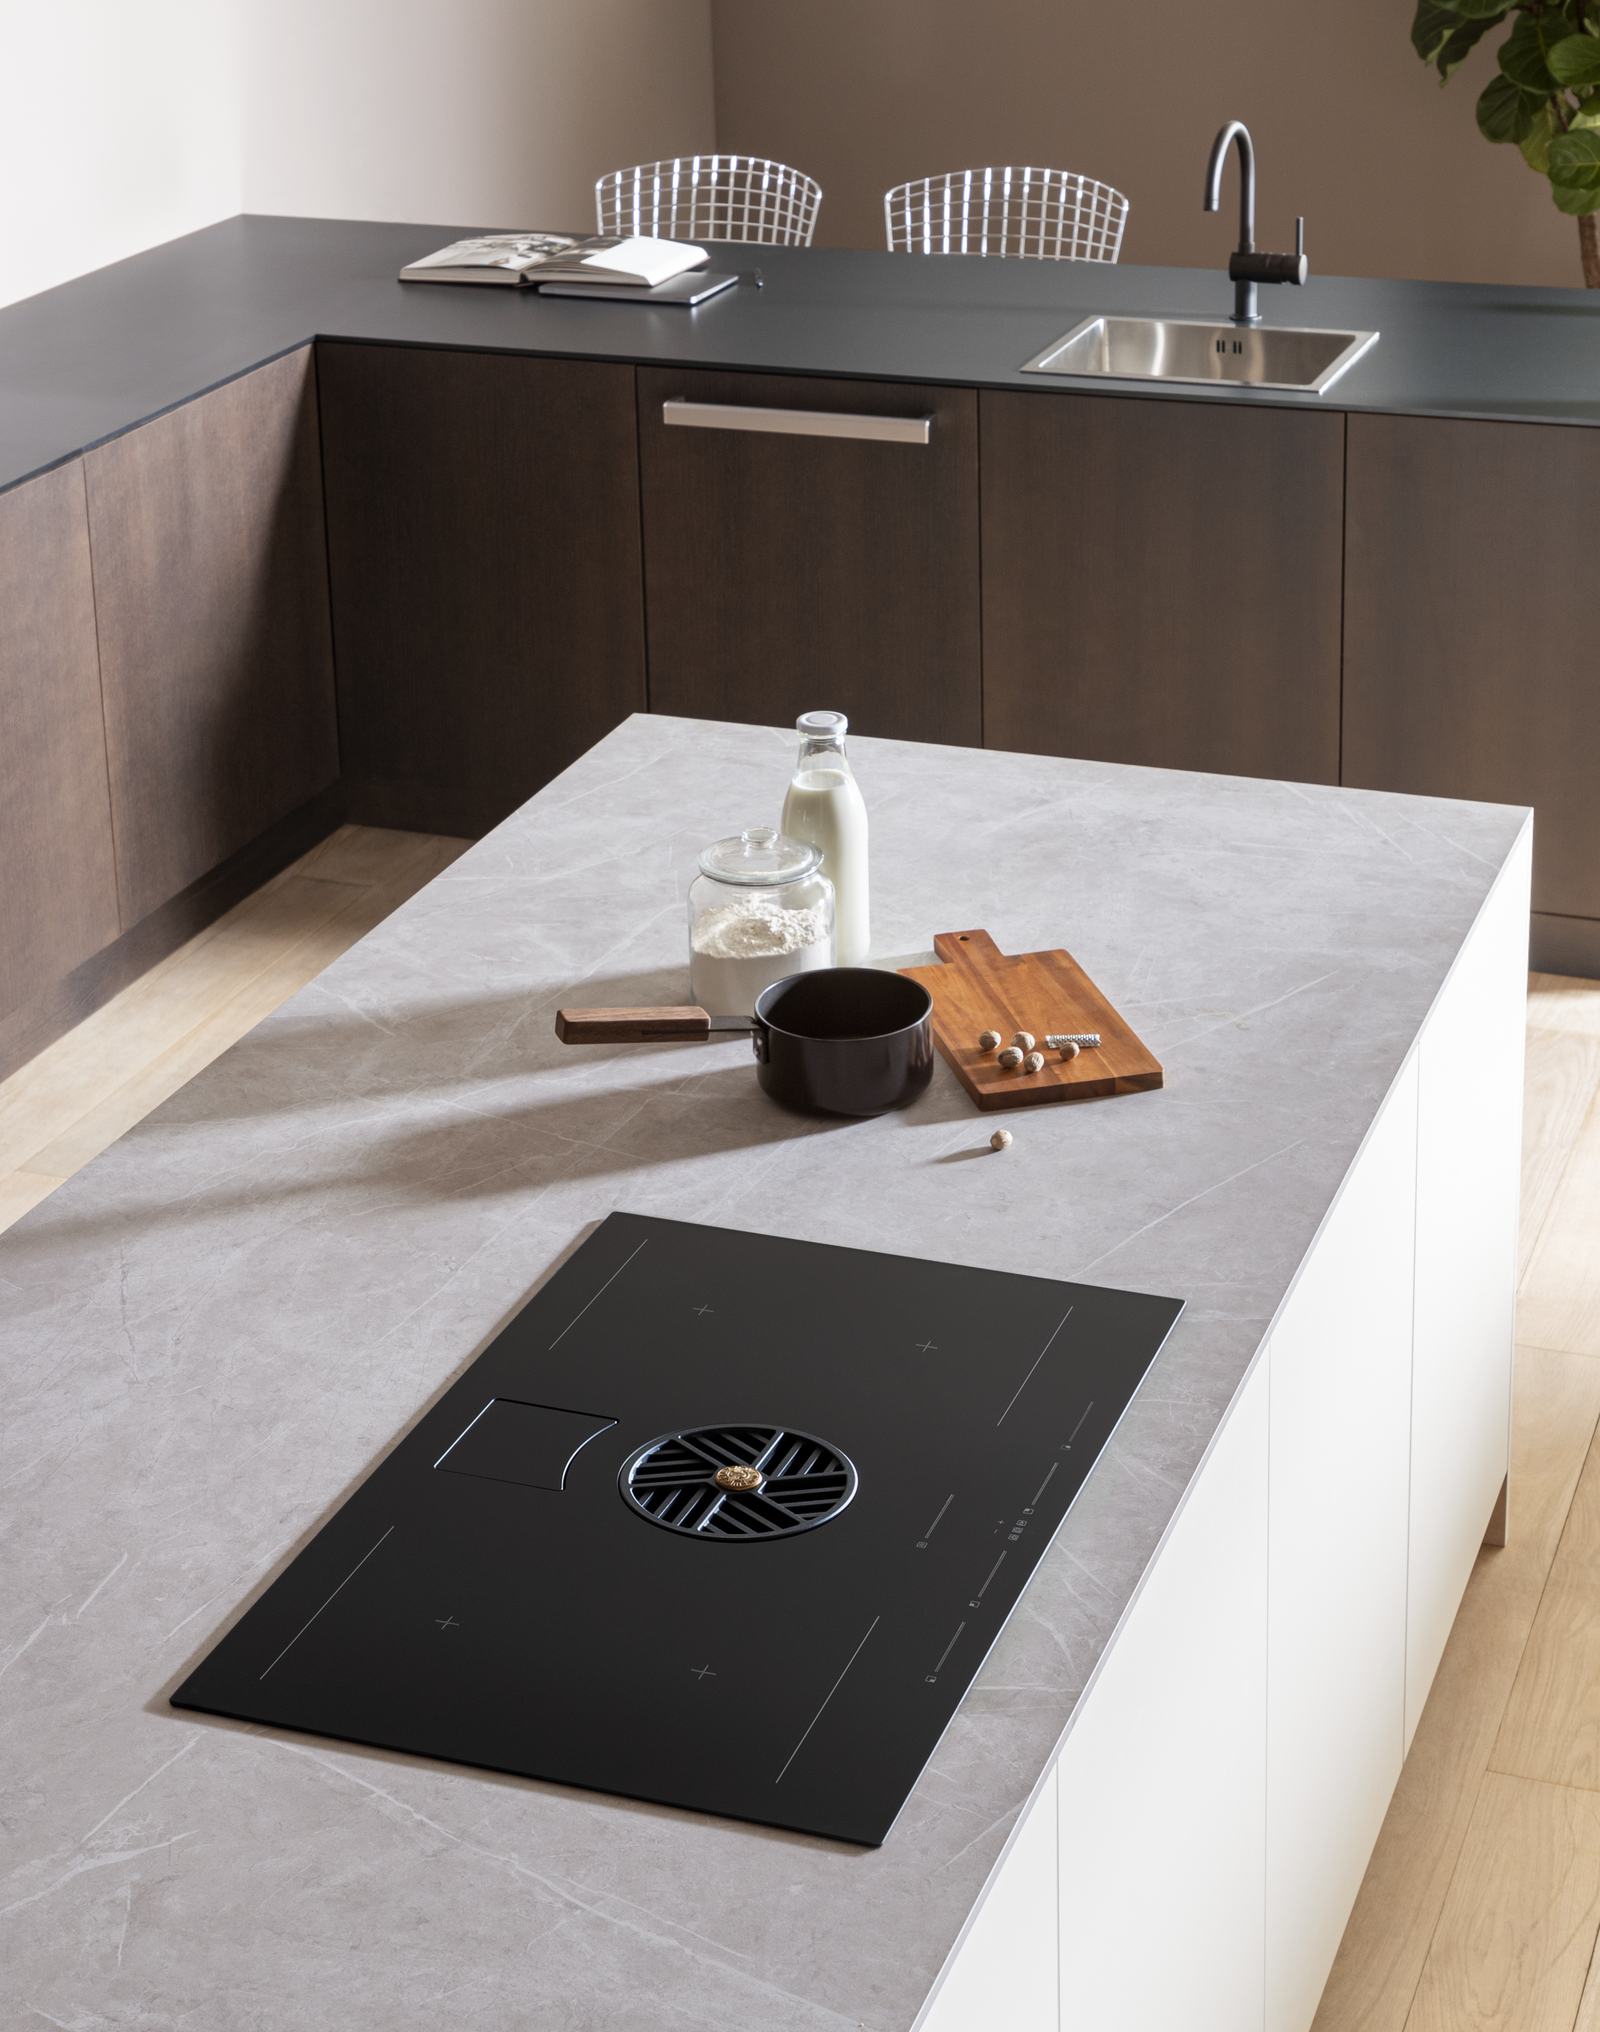 Bertazzoni hob with ventilation in a stylish kitchen with white marble counter contrasting against black induction hob